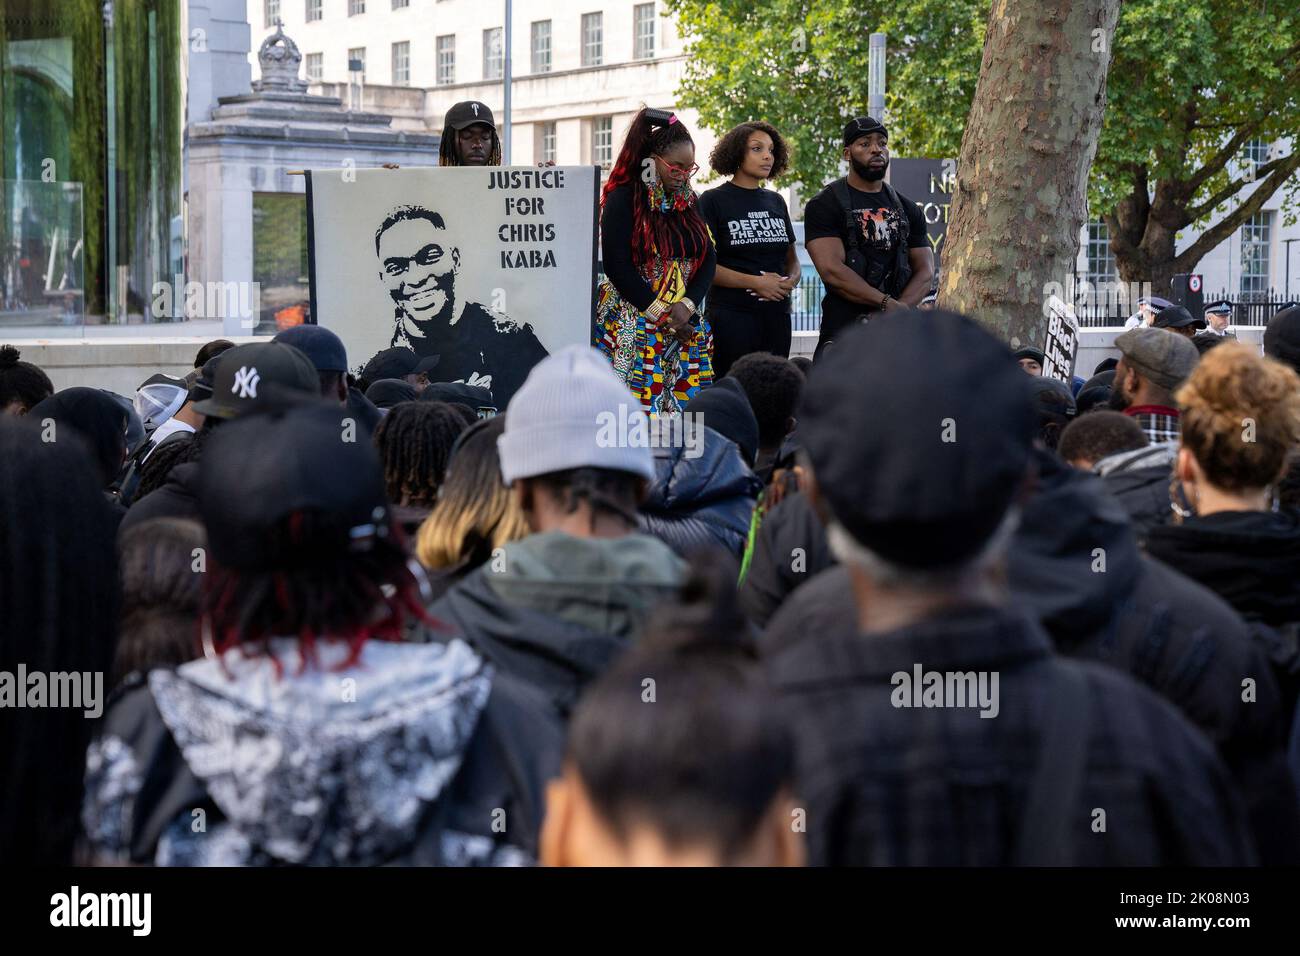 Black Lives Matter protesters observe one minute of silence in front of New Scotland Yard building in central London demanding justice for 24 year old Chris Kaba, who was shot dead by the police last week, London, Britain, September 10, 2022. REUTERS/Maja Smiejkowska Stock Photo